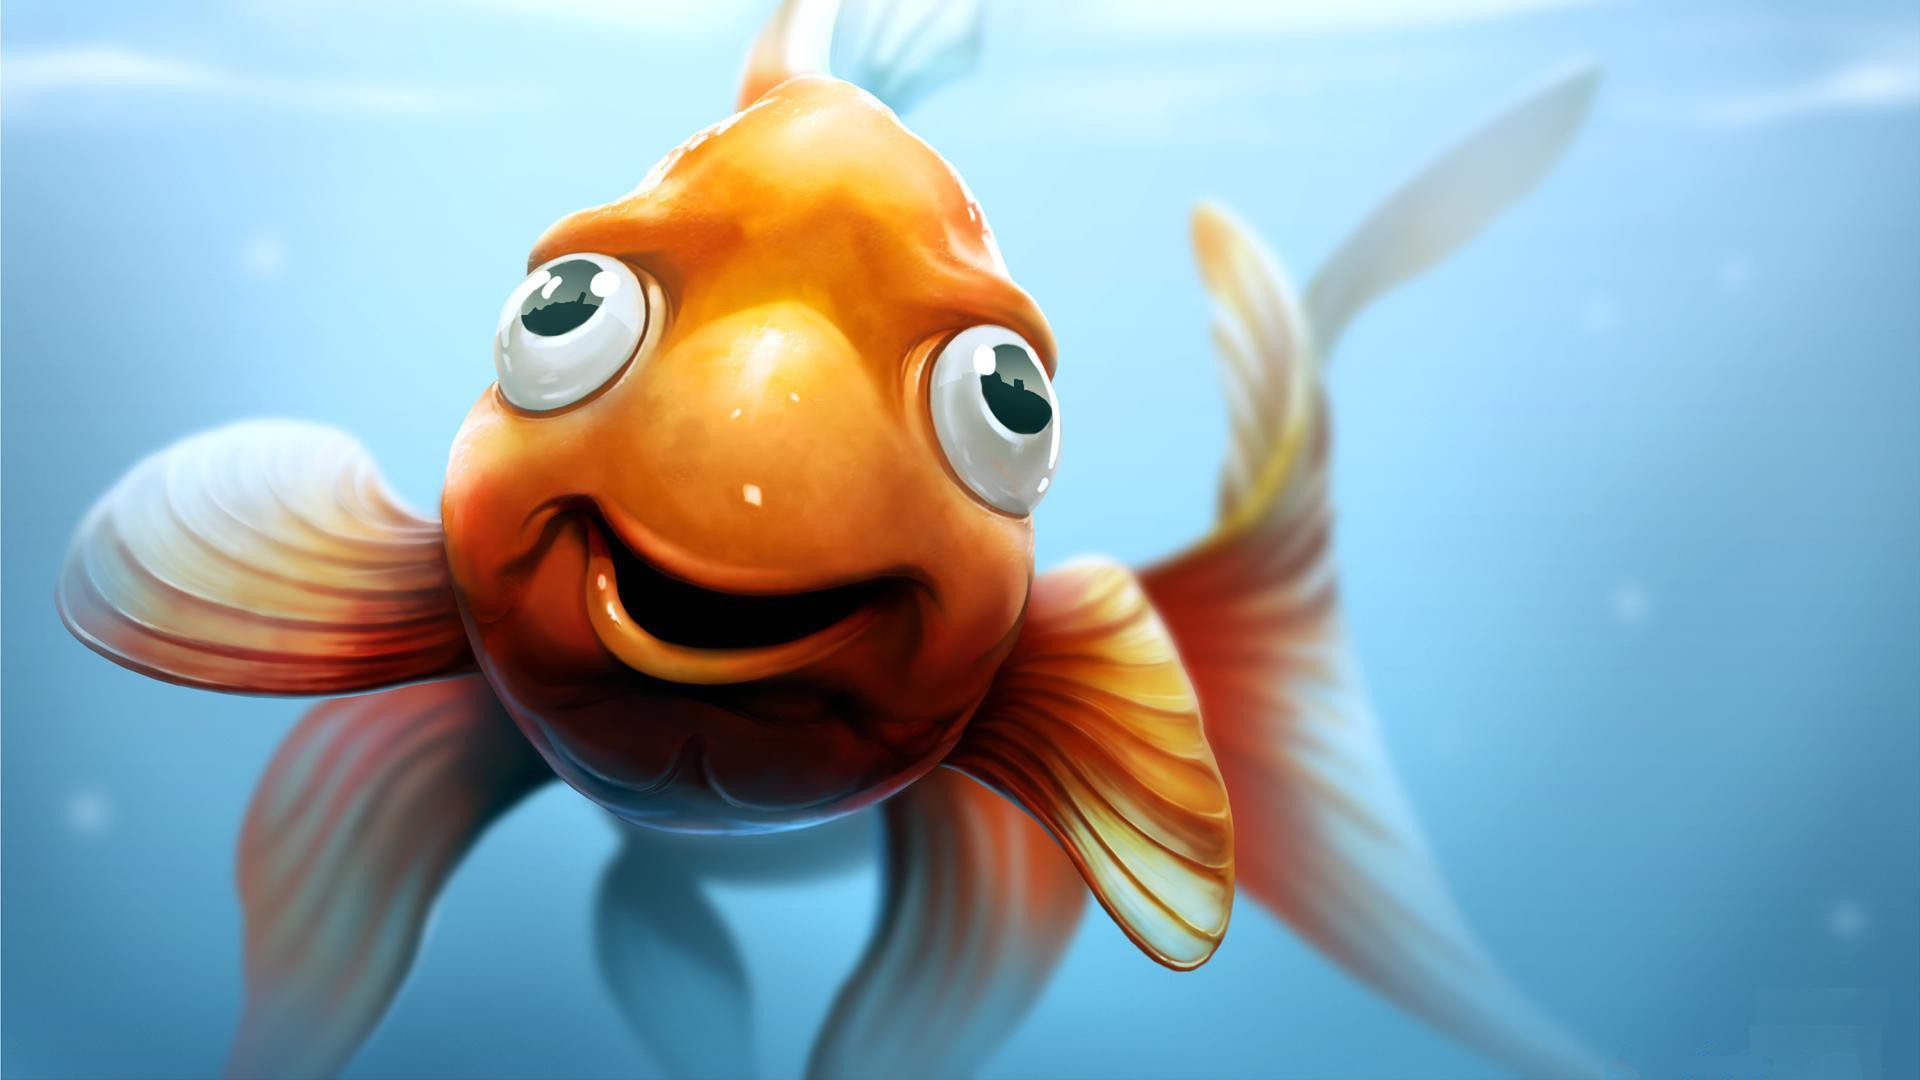 funny fish wallpapers 1280x1024 299825 on funny fish wallpapers